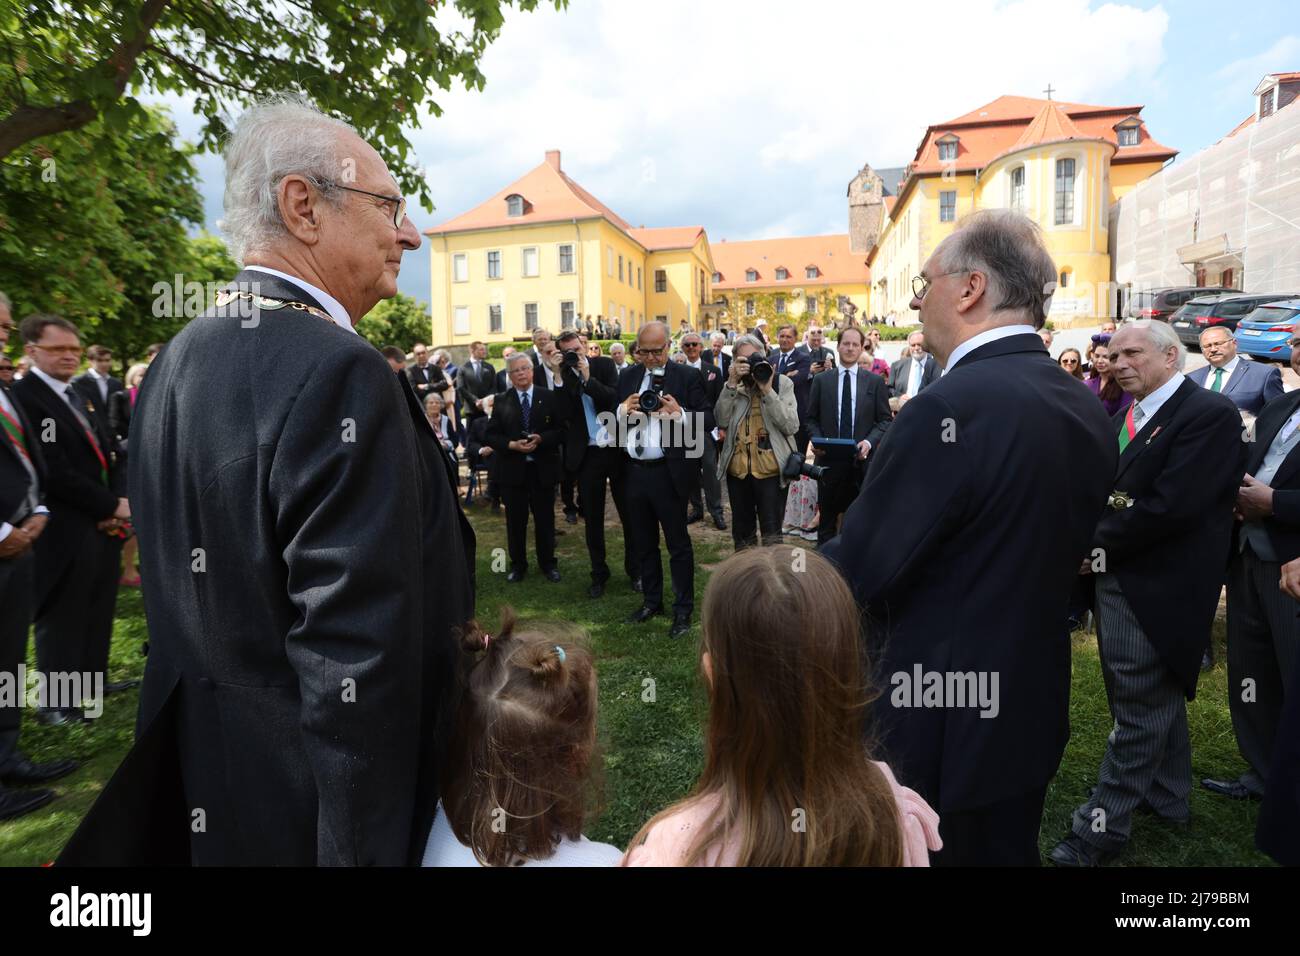 07 May 2022, Saxony-Anhalt, Ballenstedt: Eduard Prince of Anhalt (l.) stands with Saxony-Anhalt's Prime Minister Reiner Haseloff at the memorial stone of the last Duke Joachim Ernst of Anhalt. Eduard von Anhalt celebrates his 80th birthday in Ballenstedt. At the same time the investiture took place. Within the scope of the Investiture, persons are honored annually for special achievements by the Askan House Order 'Albrecht the Bear'. The investiture takes place in the presence of Eduard Prince of Anhalt. Photo: Matthias Bein/dpa-Zentralbild/ZB Stock Photo